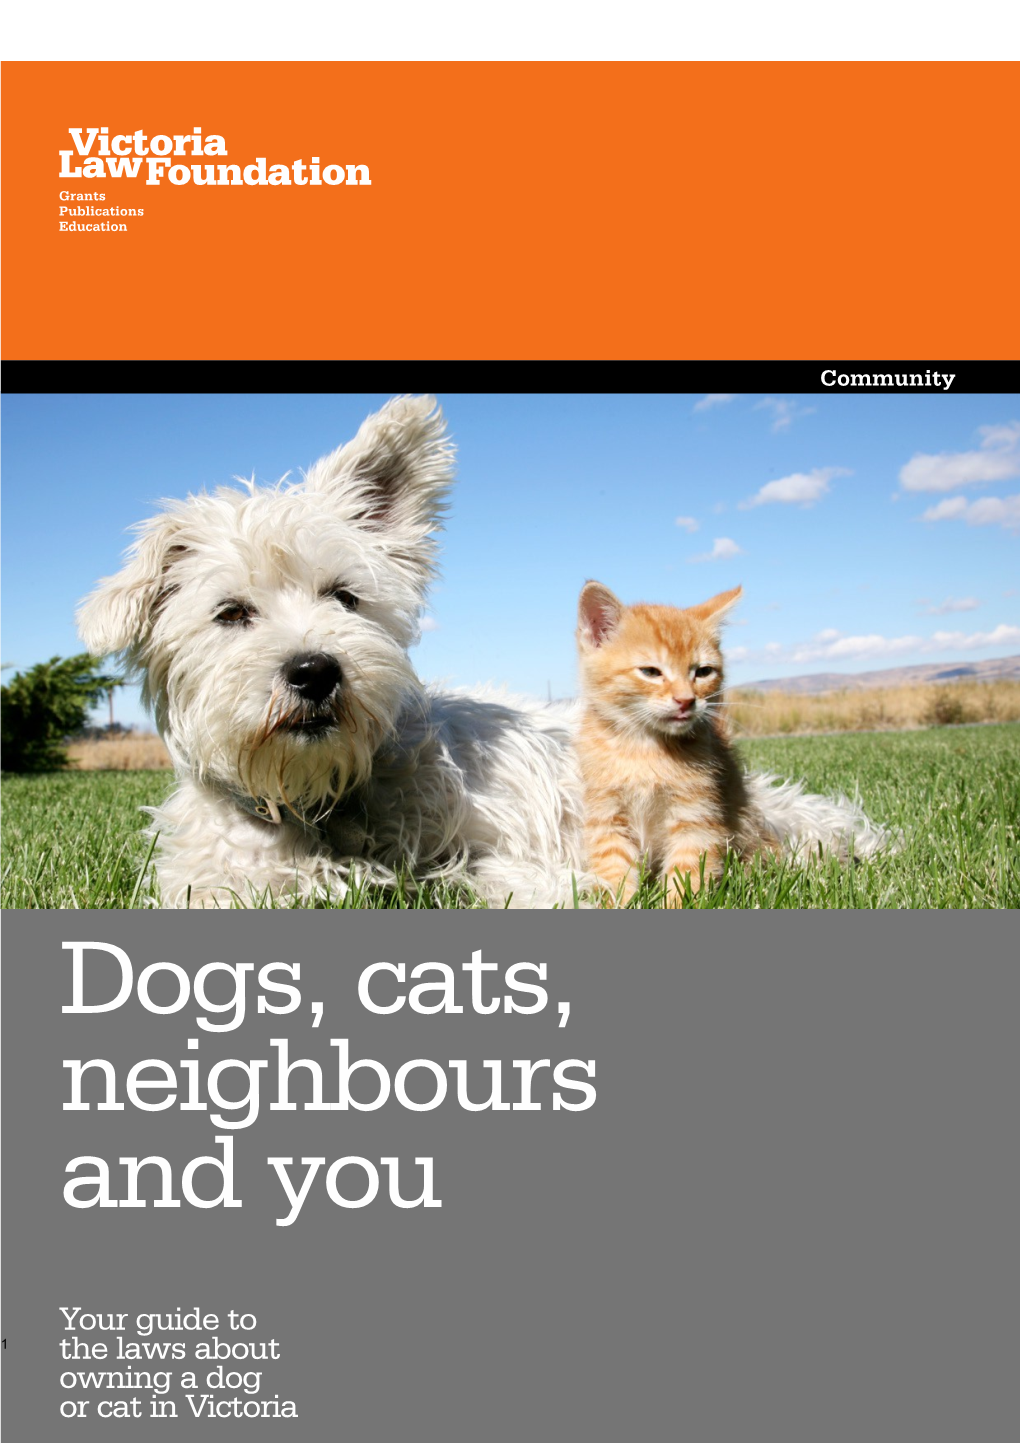 Your Guide to the Laws About Owning a Dog Or Cat in Victoria